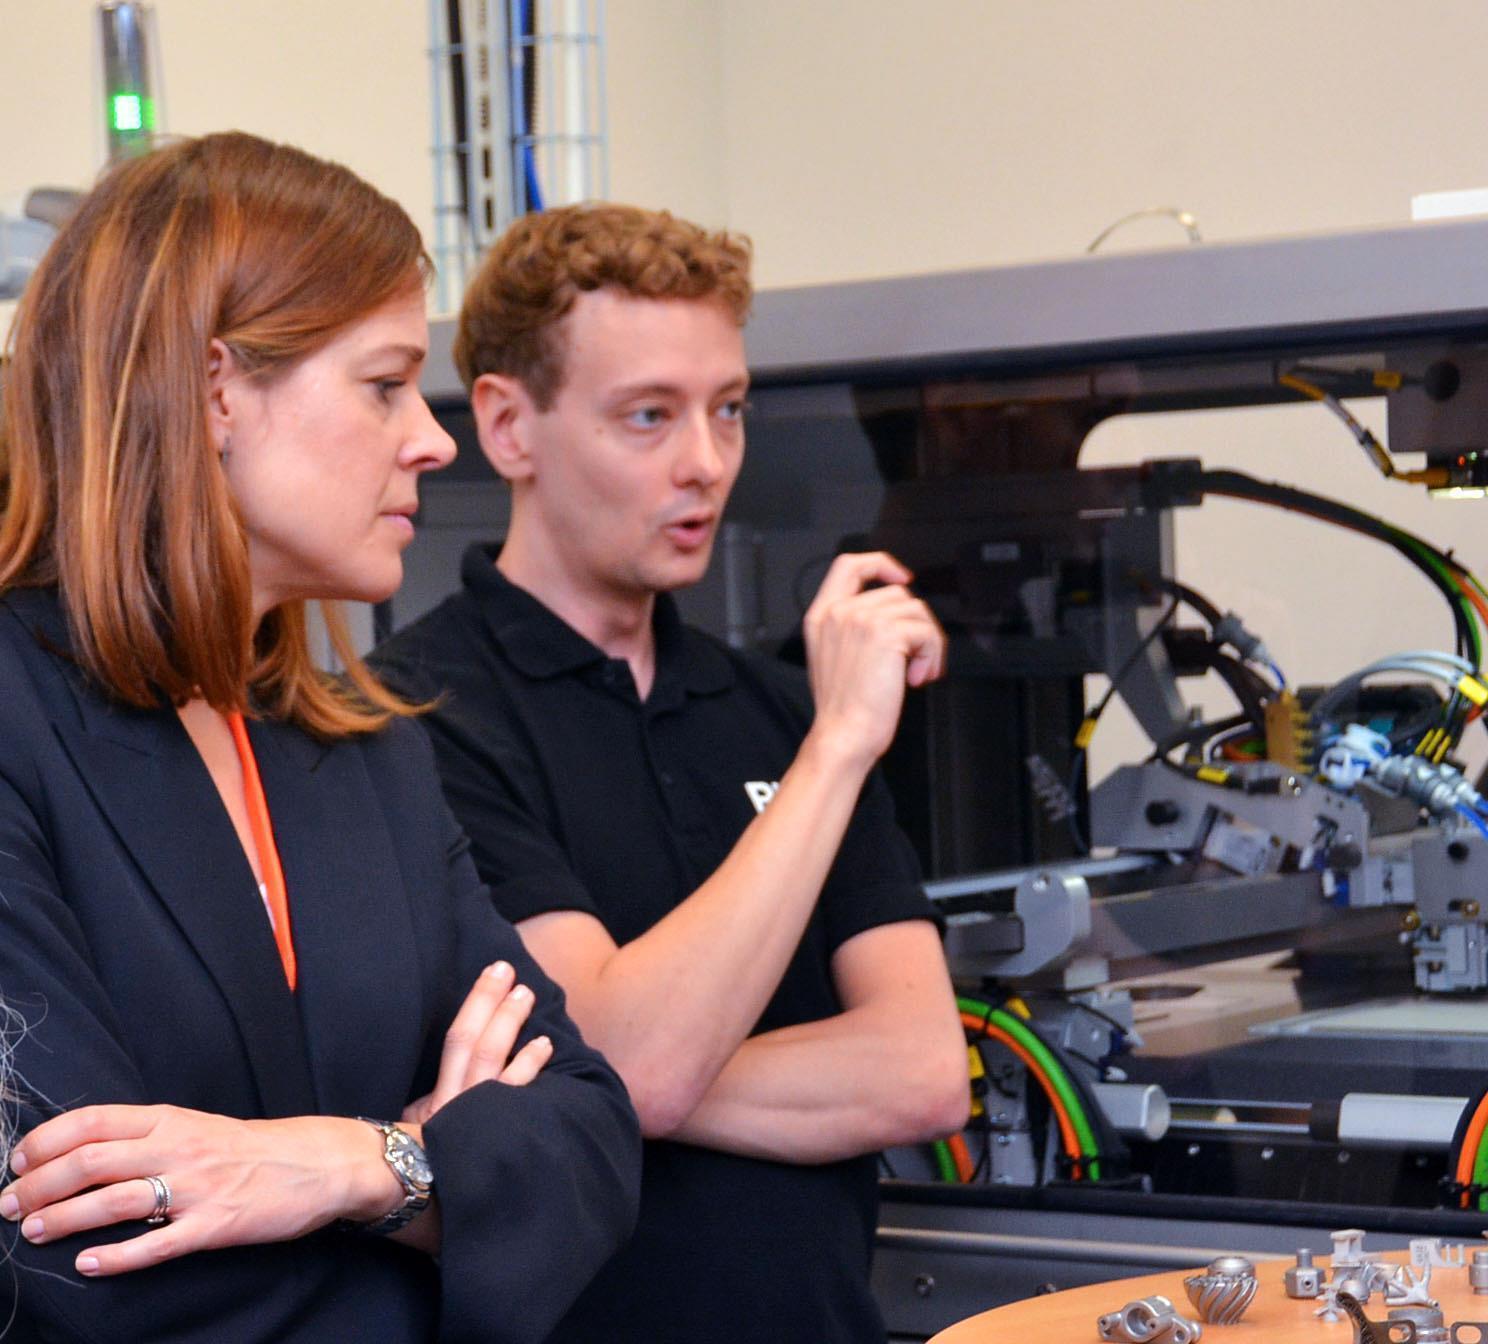 Sara Modig at the Application Center for Additive Manufacturing